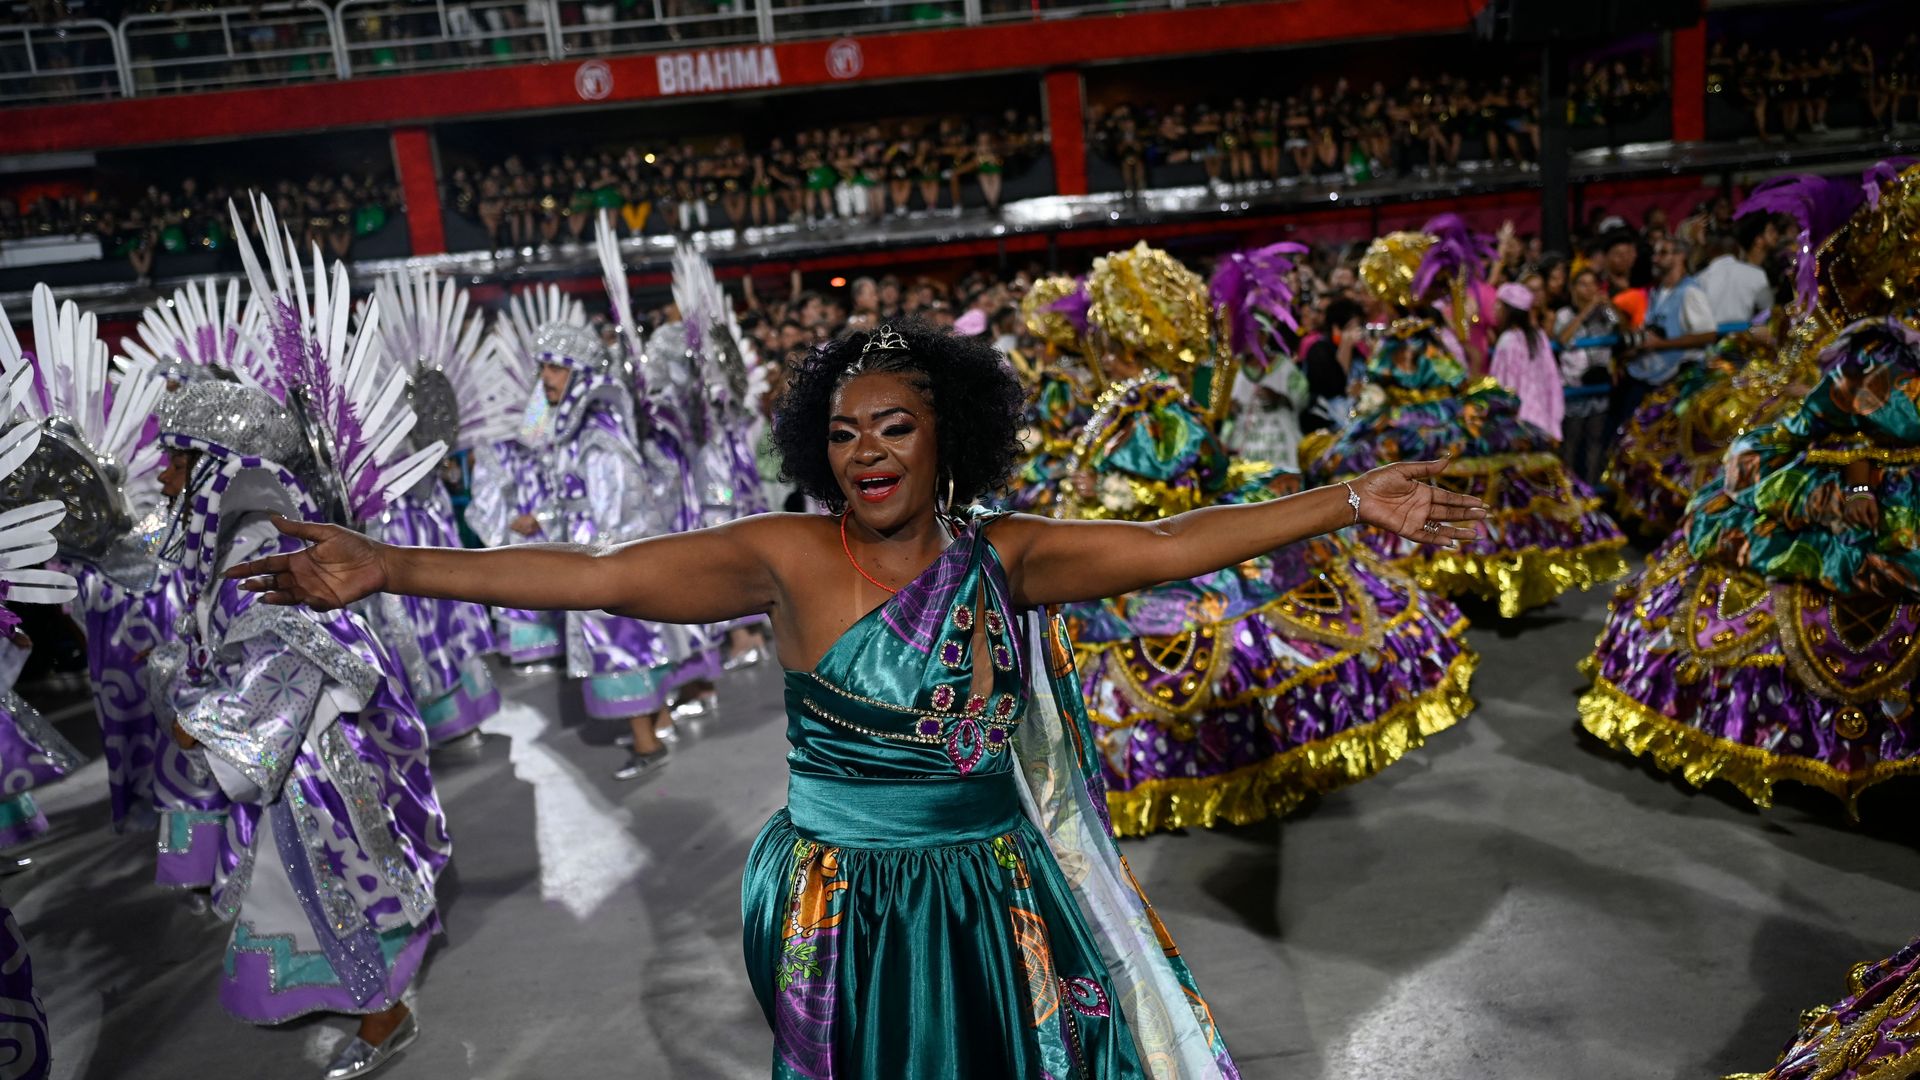 A woman in a birght green and blue dress has her arms outstretched during Carnival in Brazil. She's surrounded by dancers in bright clothing